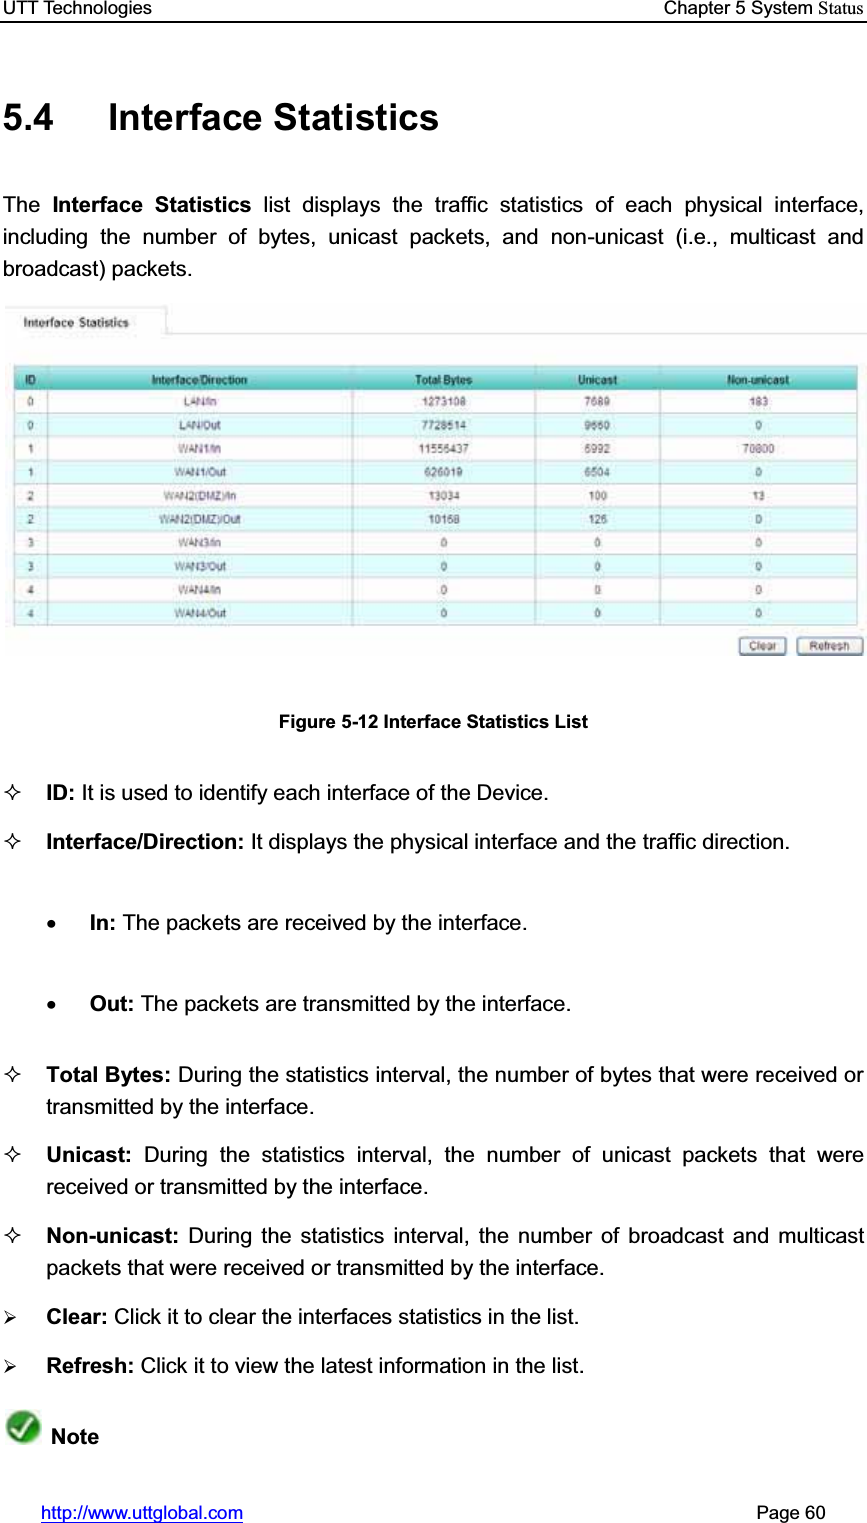 UTT Technologies    Chapter 5 System Statushttp://www.uttglobal.com                                                       Page 60 5.4 Interface Statistics The Interface Statistics list displays the traffic statistics of each physical interface, including the number of bytes, unicast packets, and non-unicast (i.e., multicast and broadcast) packets. Figure 5-12 Interface Statistics List ID: It is used to identify each interface of the Device.Interface/Direction: It displays the physical interface and the traffic direction.   xIn: The packets are received by the interface. xOut: The packets are transmitted by the interface. Total Bytes: During the statistics interval, the number of bytes that were received or transmitted by the interface. Unicast:  During the statistics interval, the number of unicast packets that were received or transmitted by the interface. Non-unicast: During the statistics interval, the number of broadcast and multicast packets that were received or transmitted by the interface. ¾Clear: Click it to clear the interfaces statistics in the list.¾Refresh: Click it to view the latest information in the list.Note